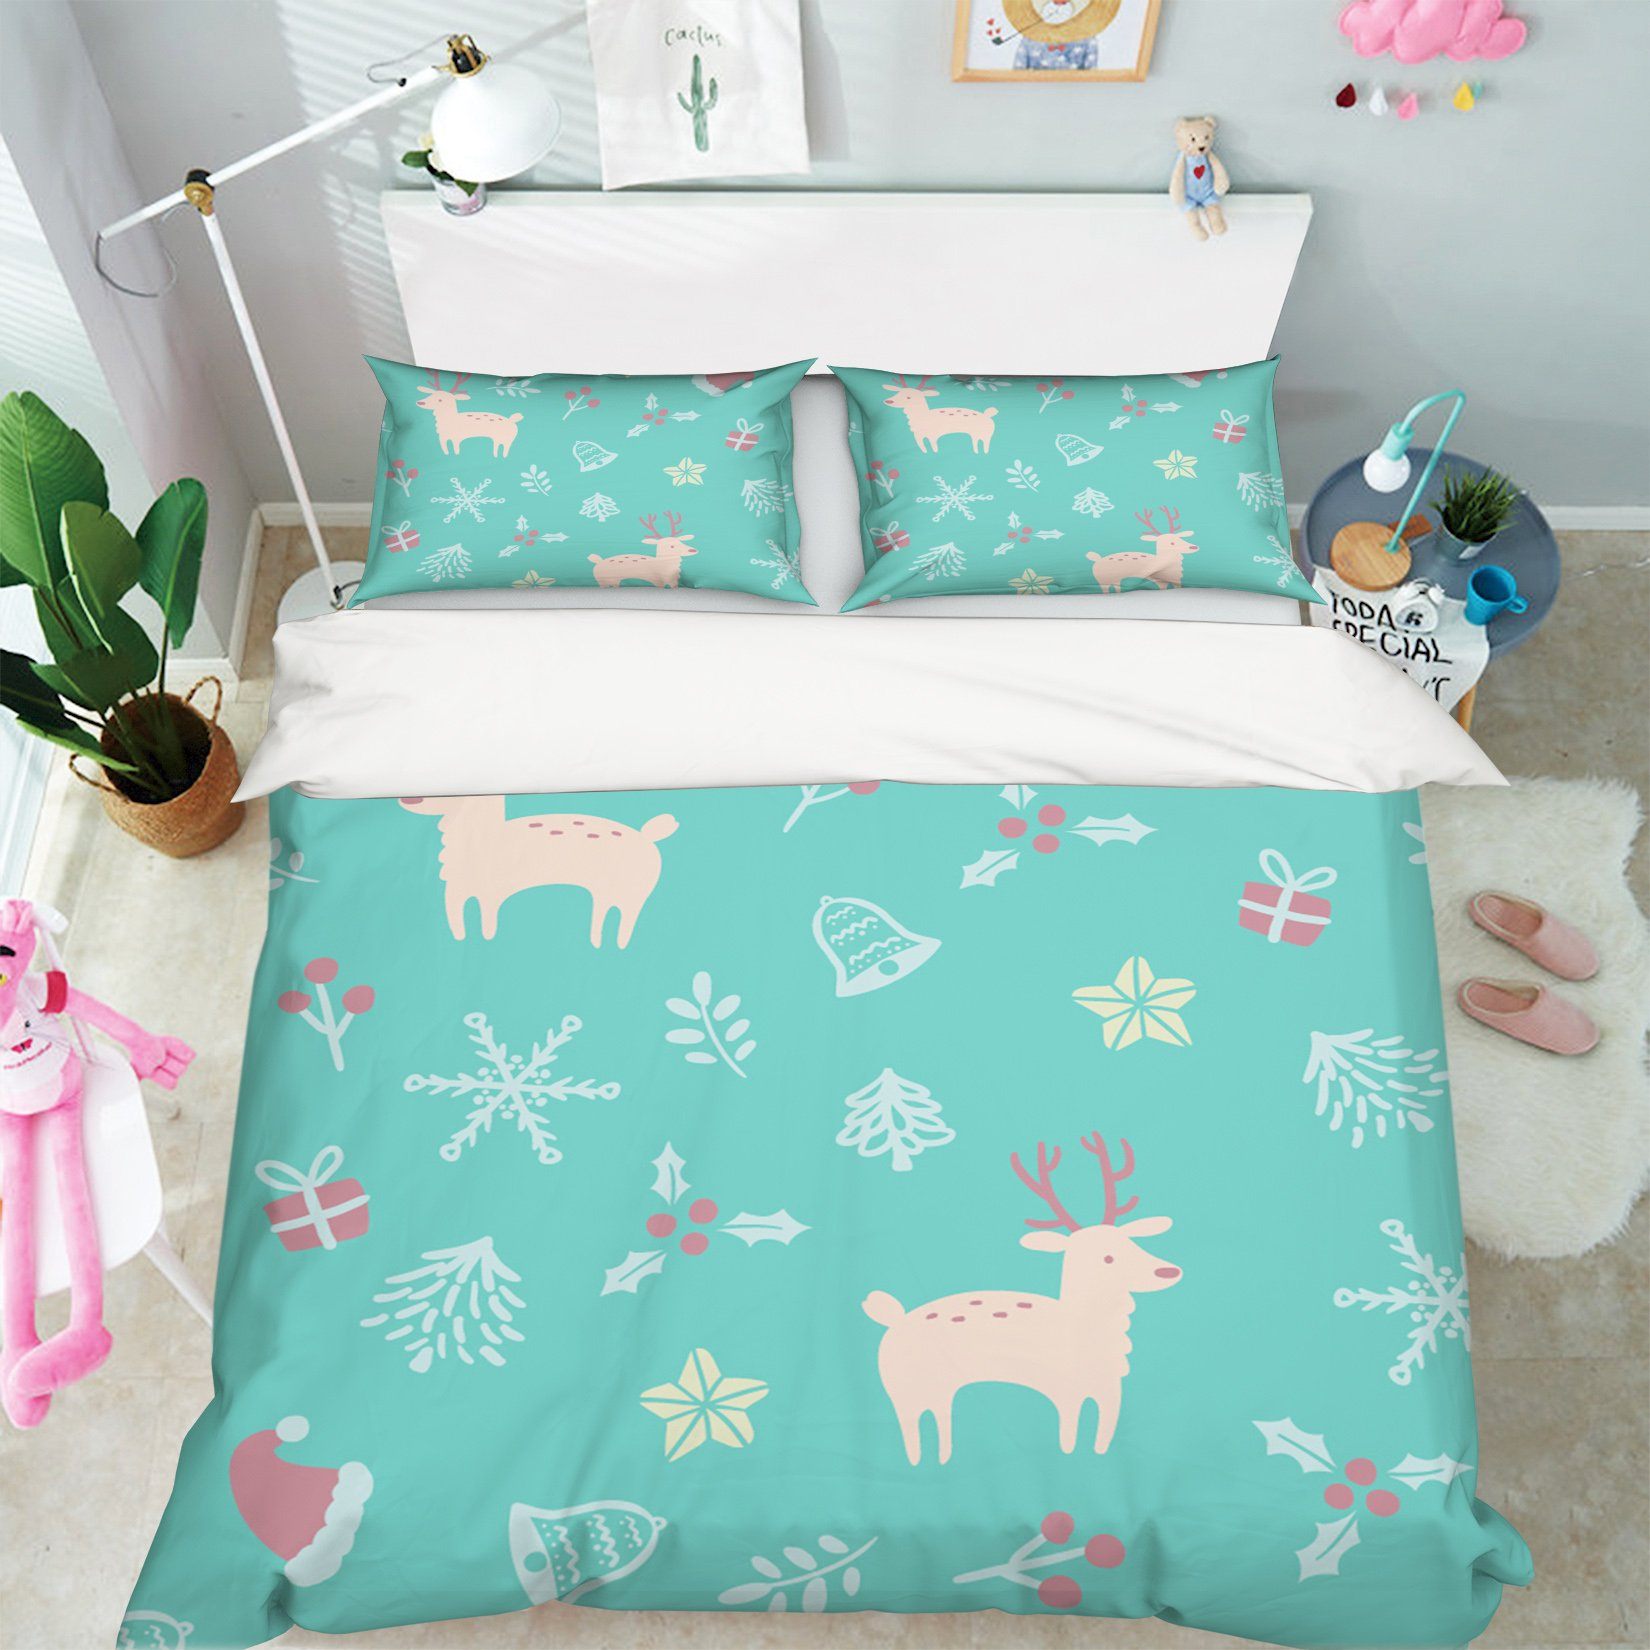 3D Christmas Deer Pattern 17 Bed Pillowcases Quilt Quiet Covers AJ Creativity Home 